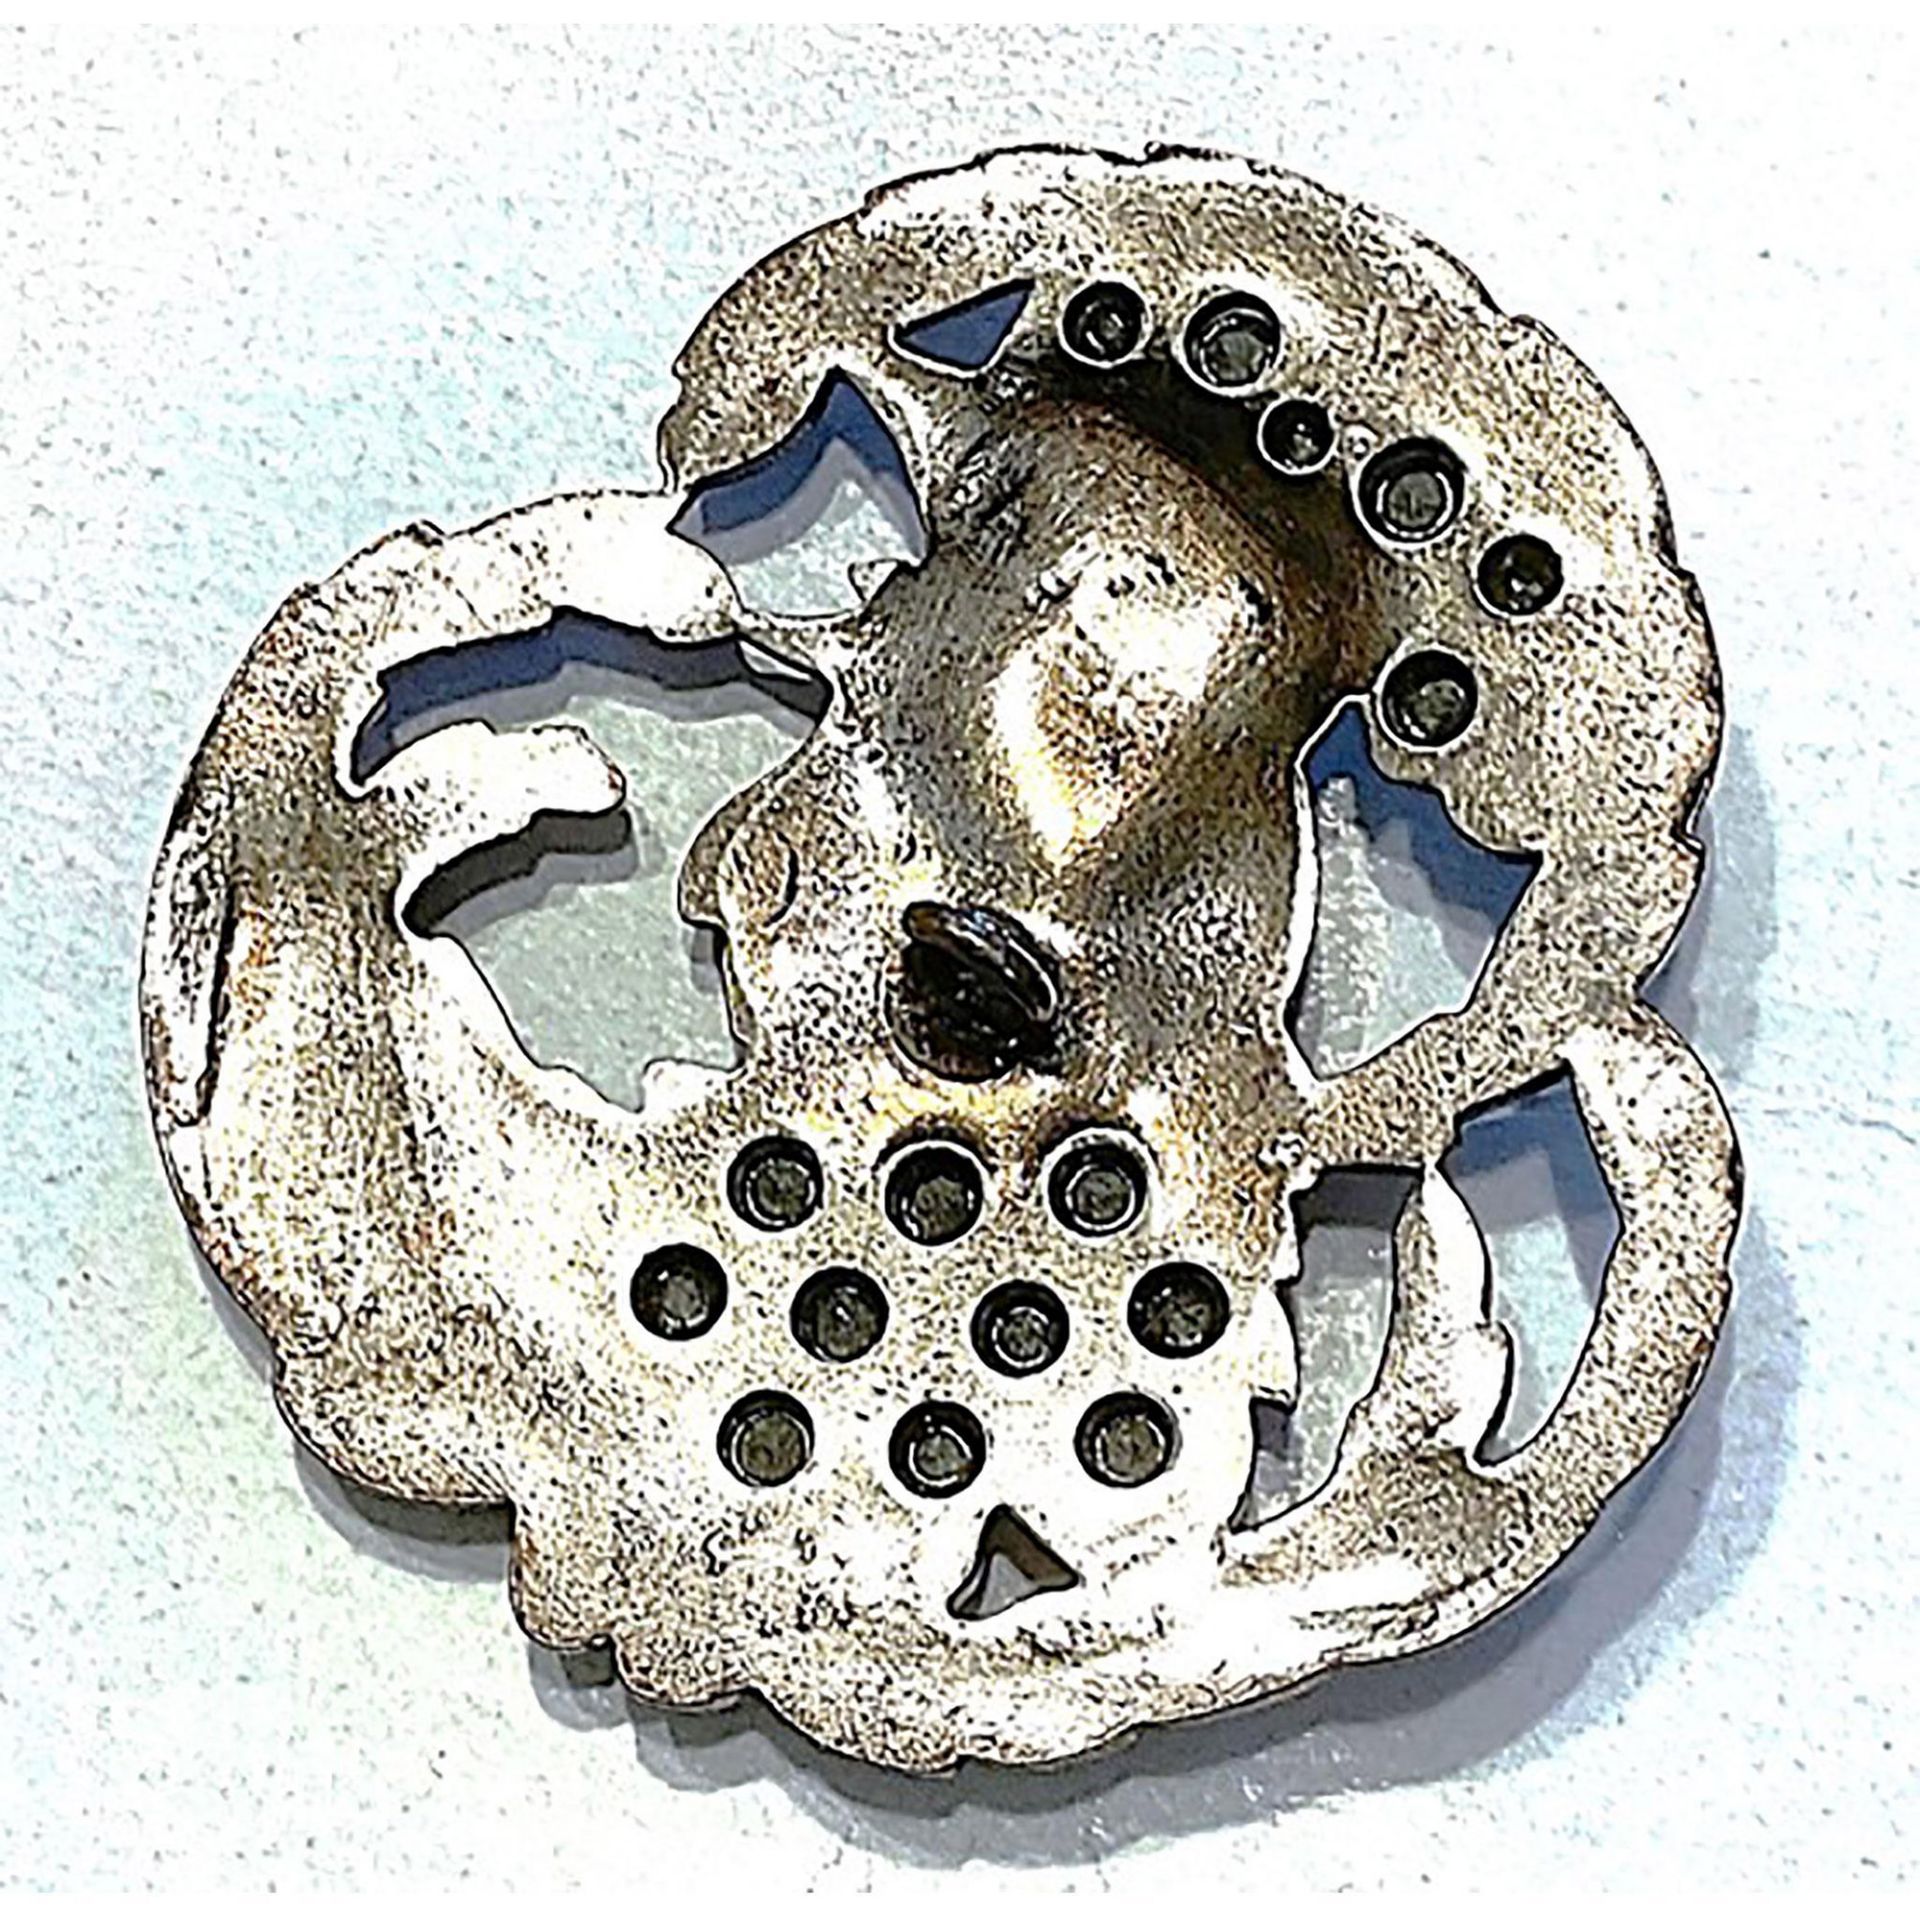 A division one pierced metal and paste rooster button - Image 2 of 2